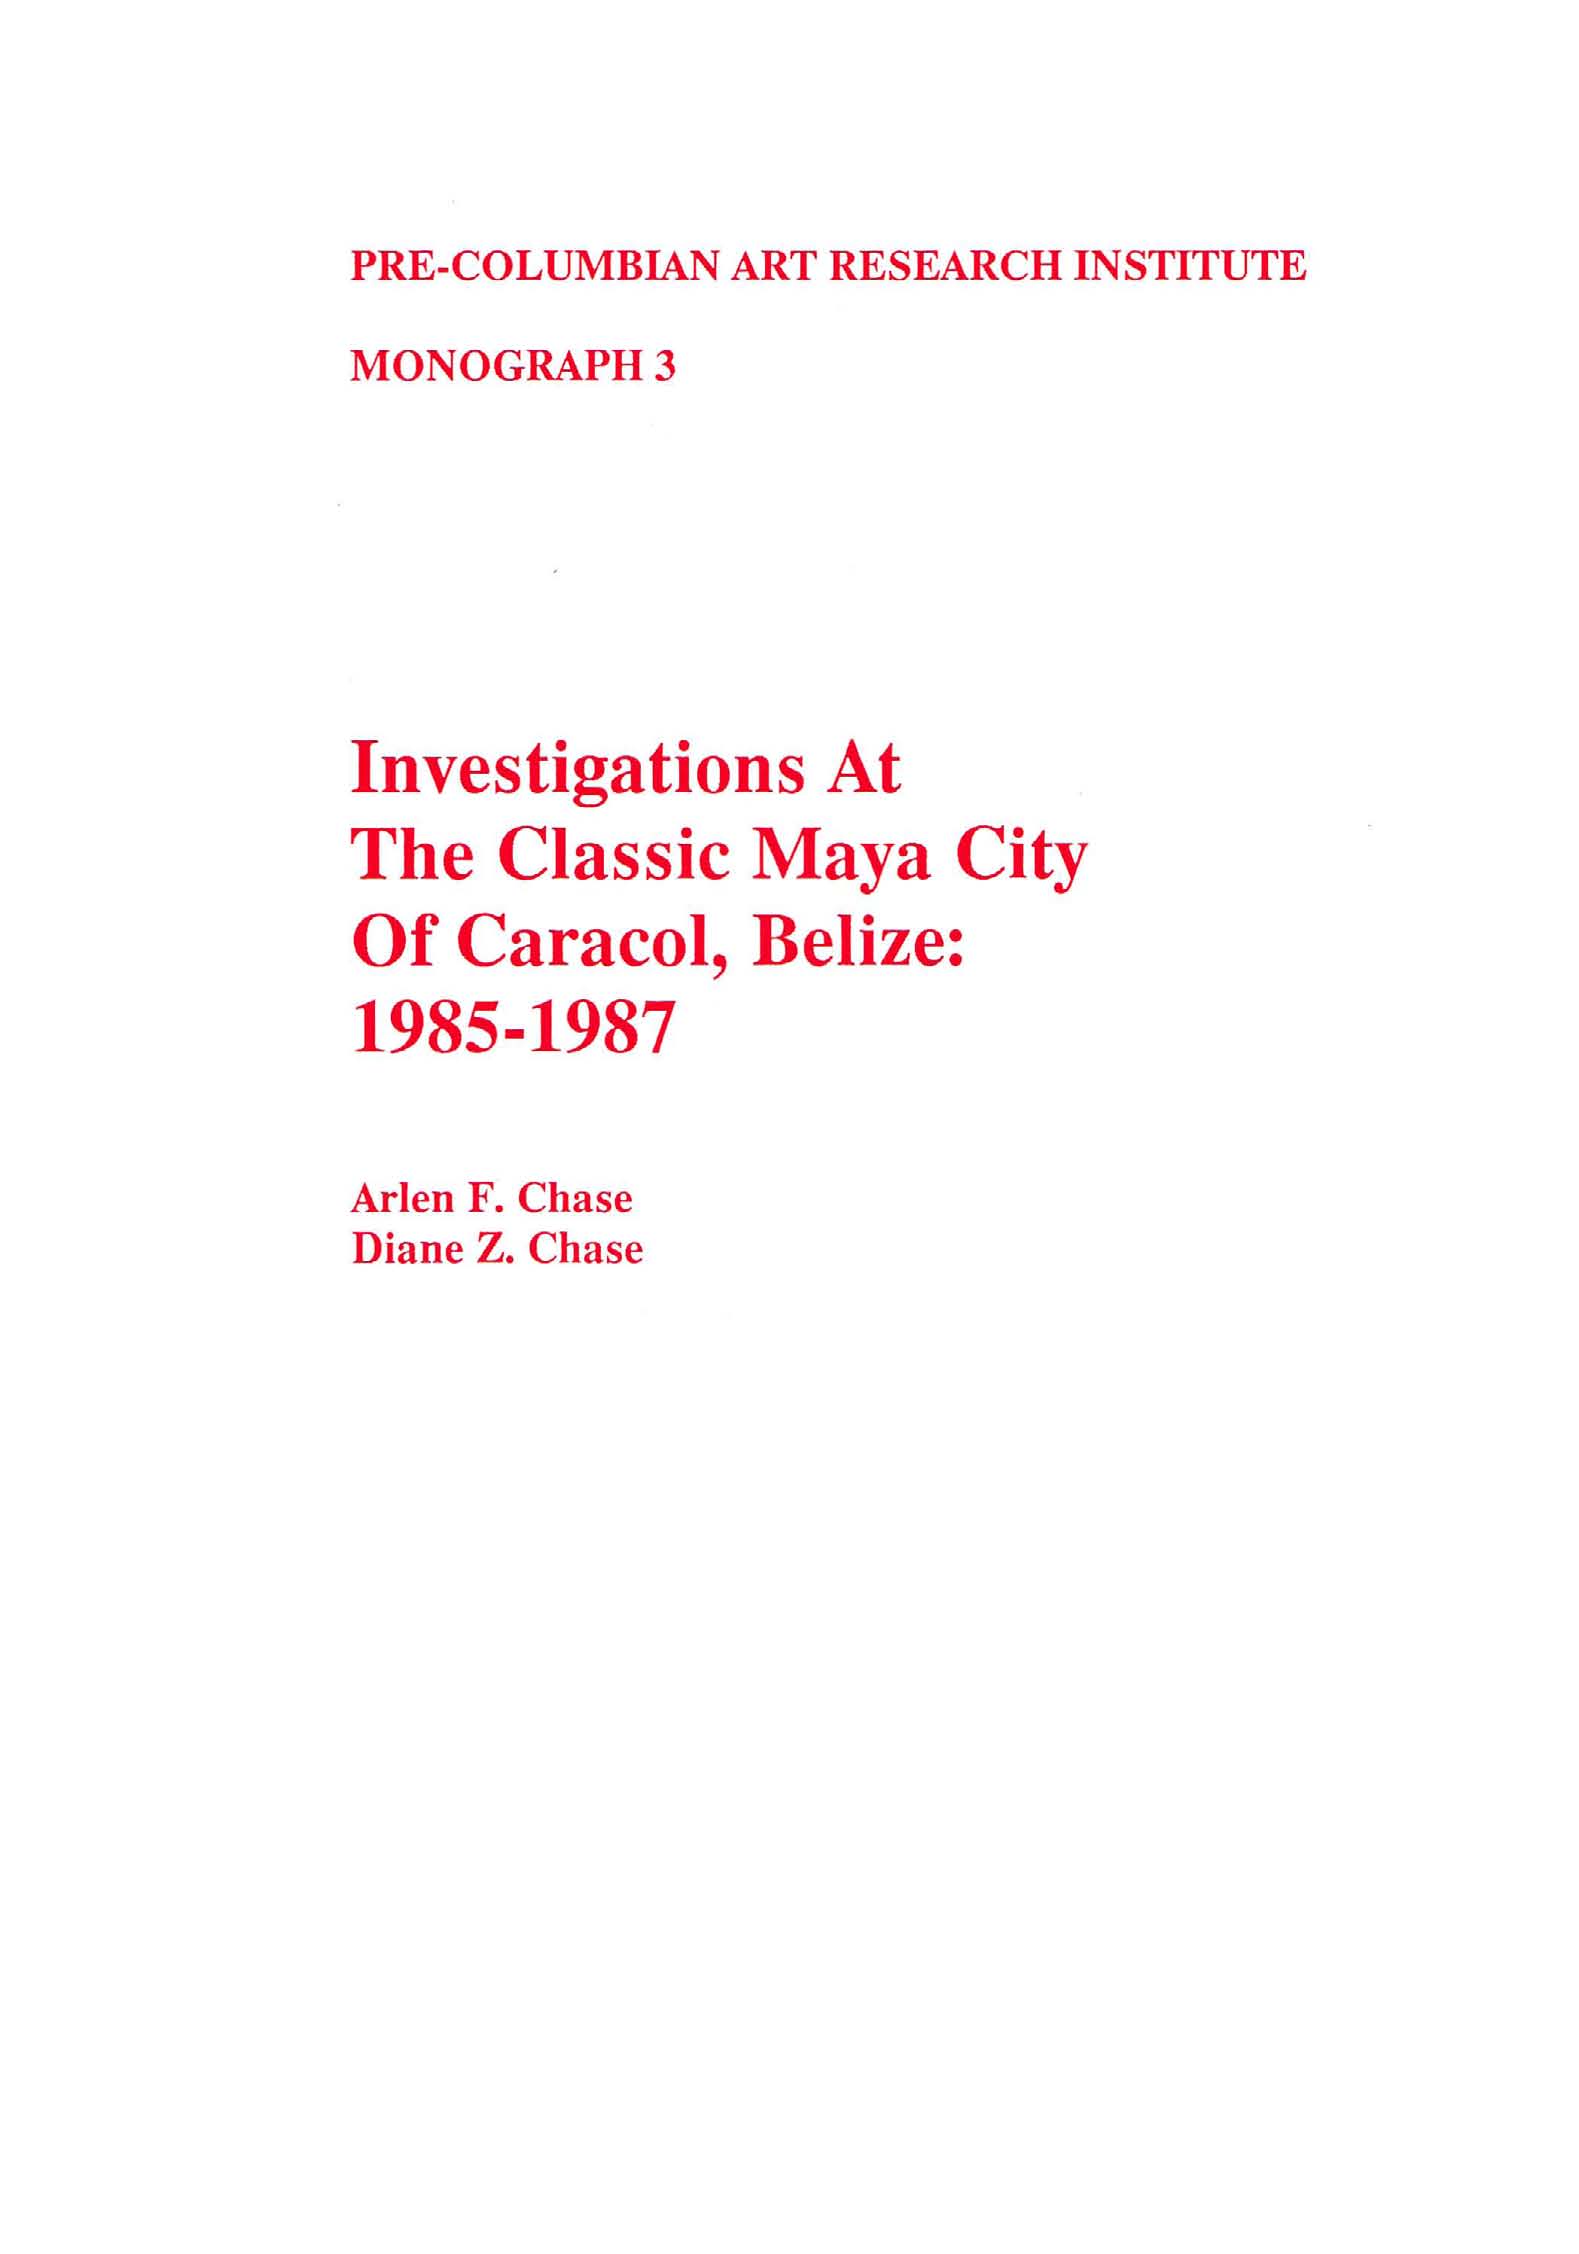 Investigations at the Classic Maya City of Caracol, Belize, 1985-1987